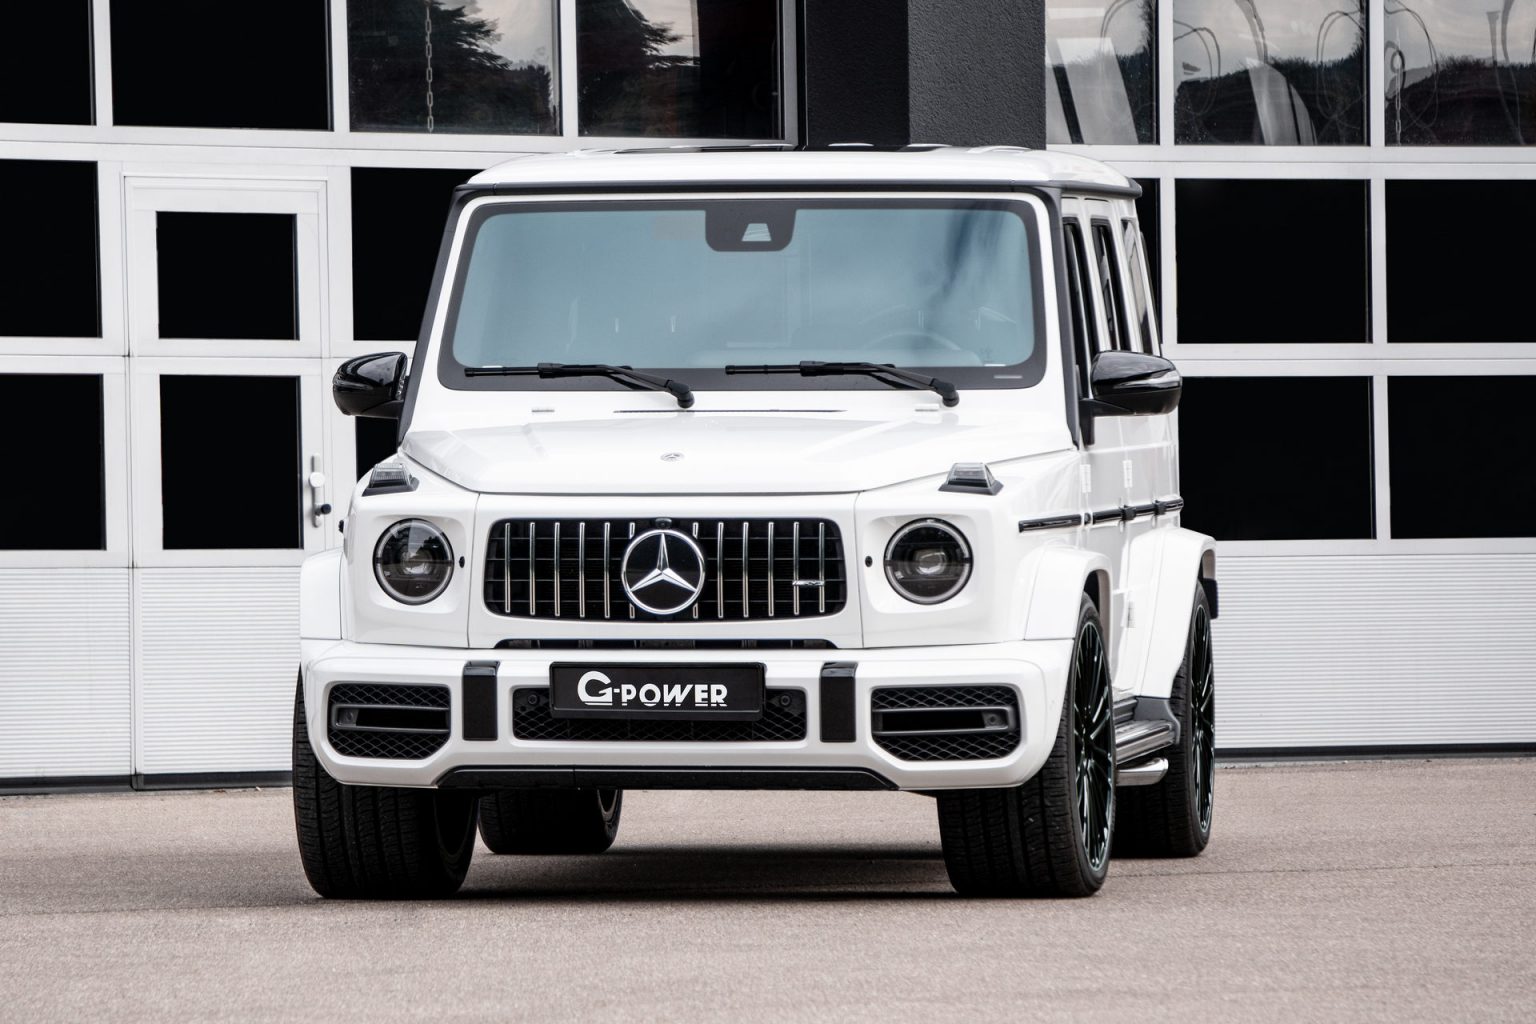 G-Power Tunes the BMW X5 M and Mercedes-AMG G63 to 800 HP